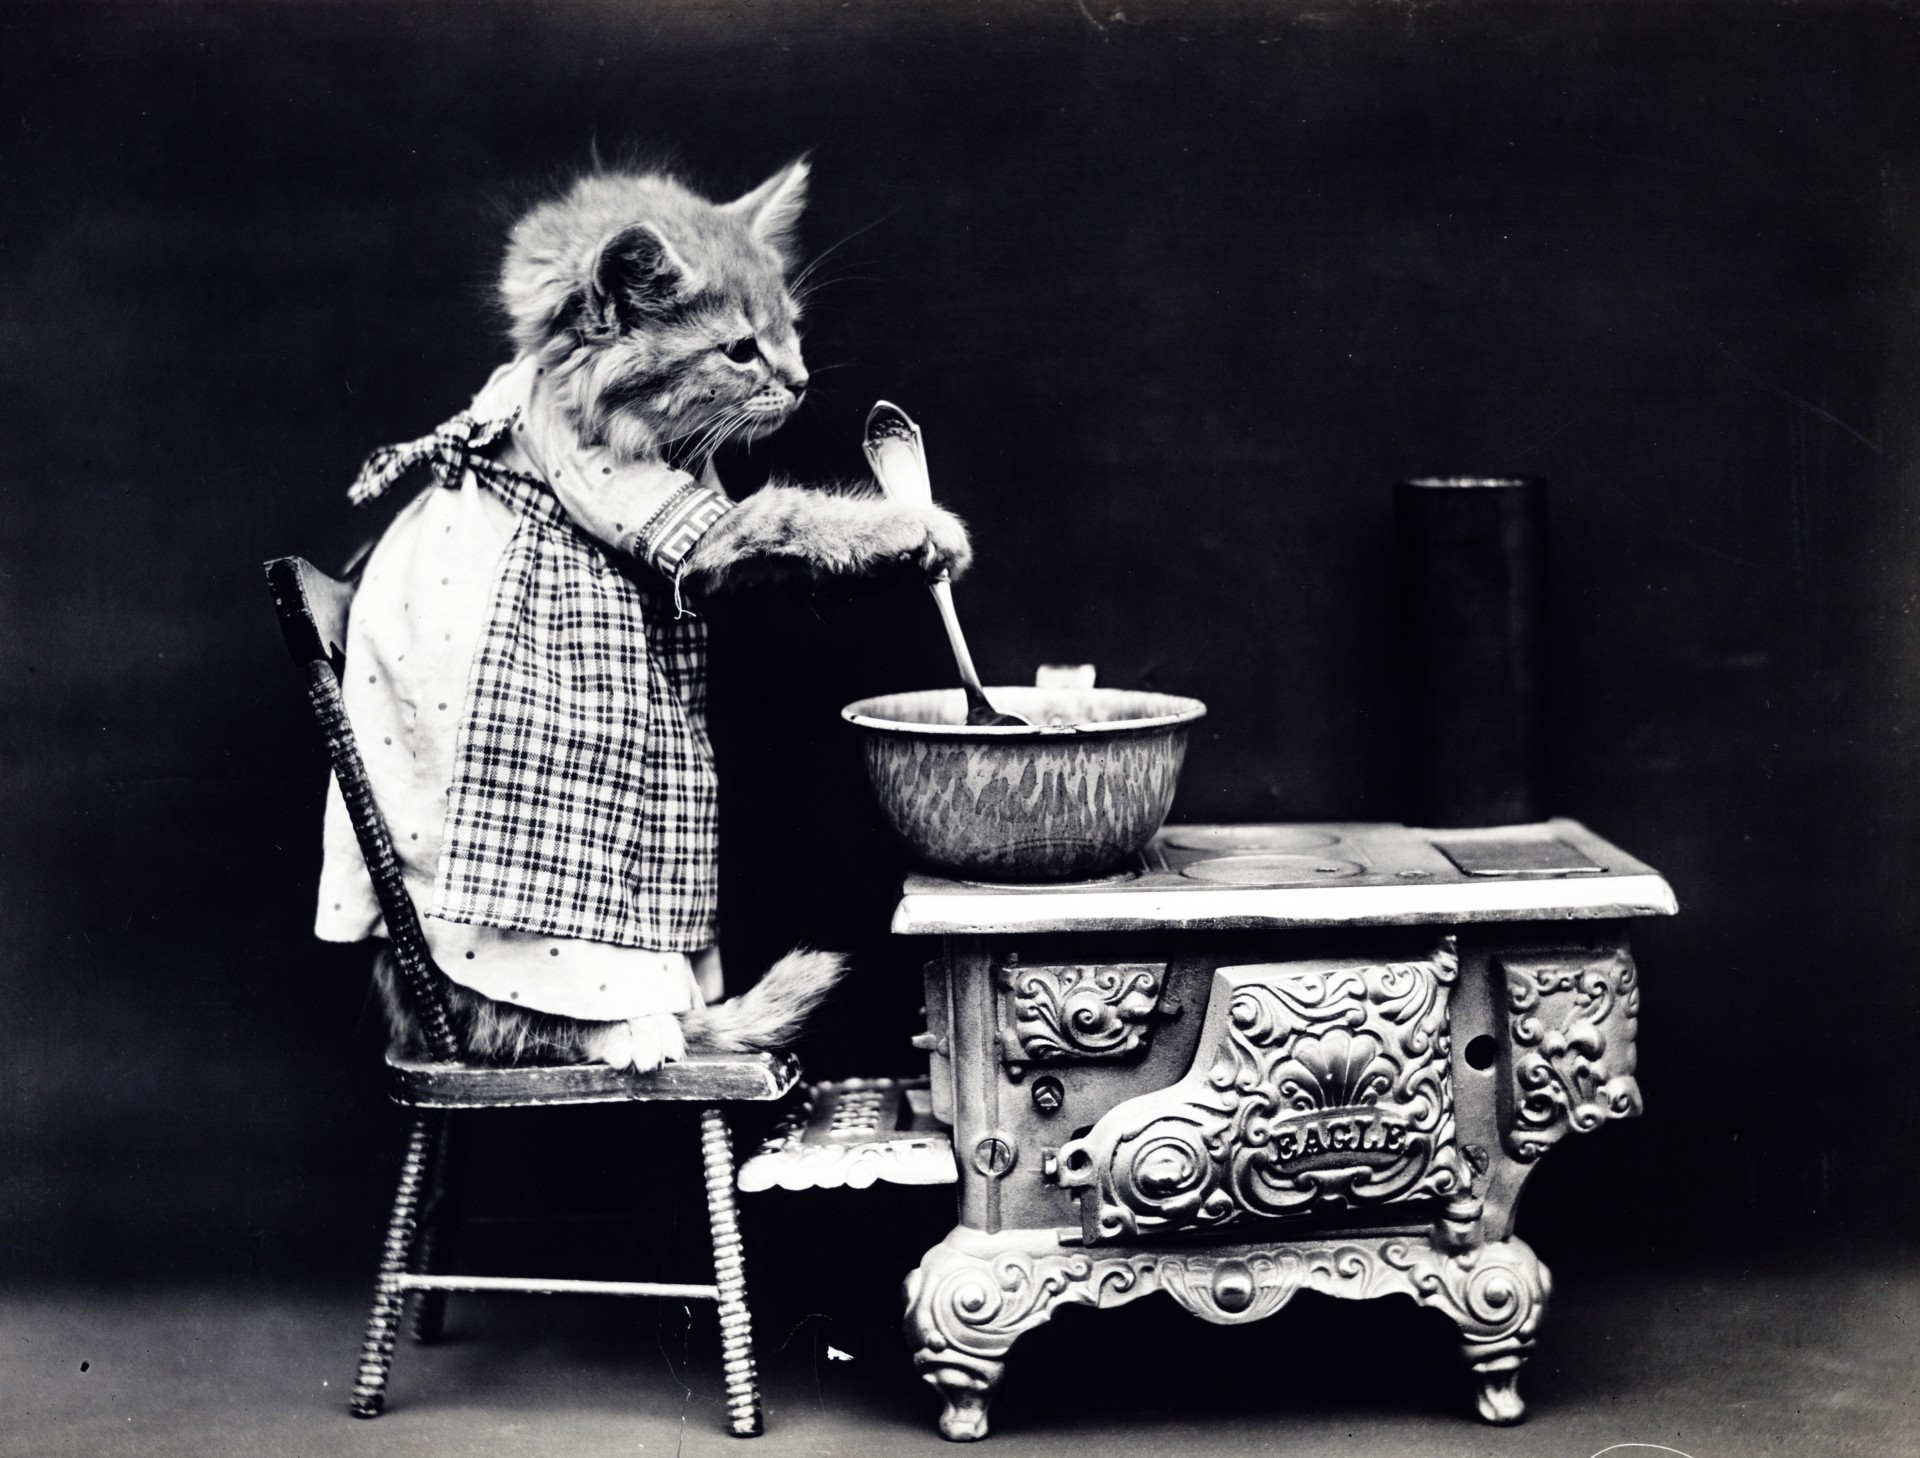 Public domain 1900s vintage photo of a kitten cat dressed in human situation cooking on the stove